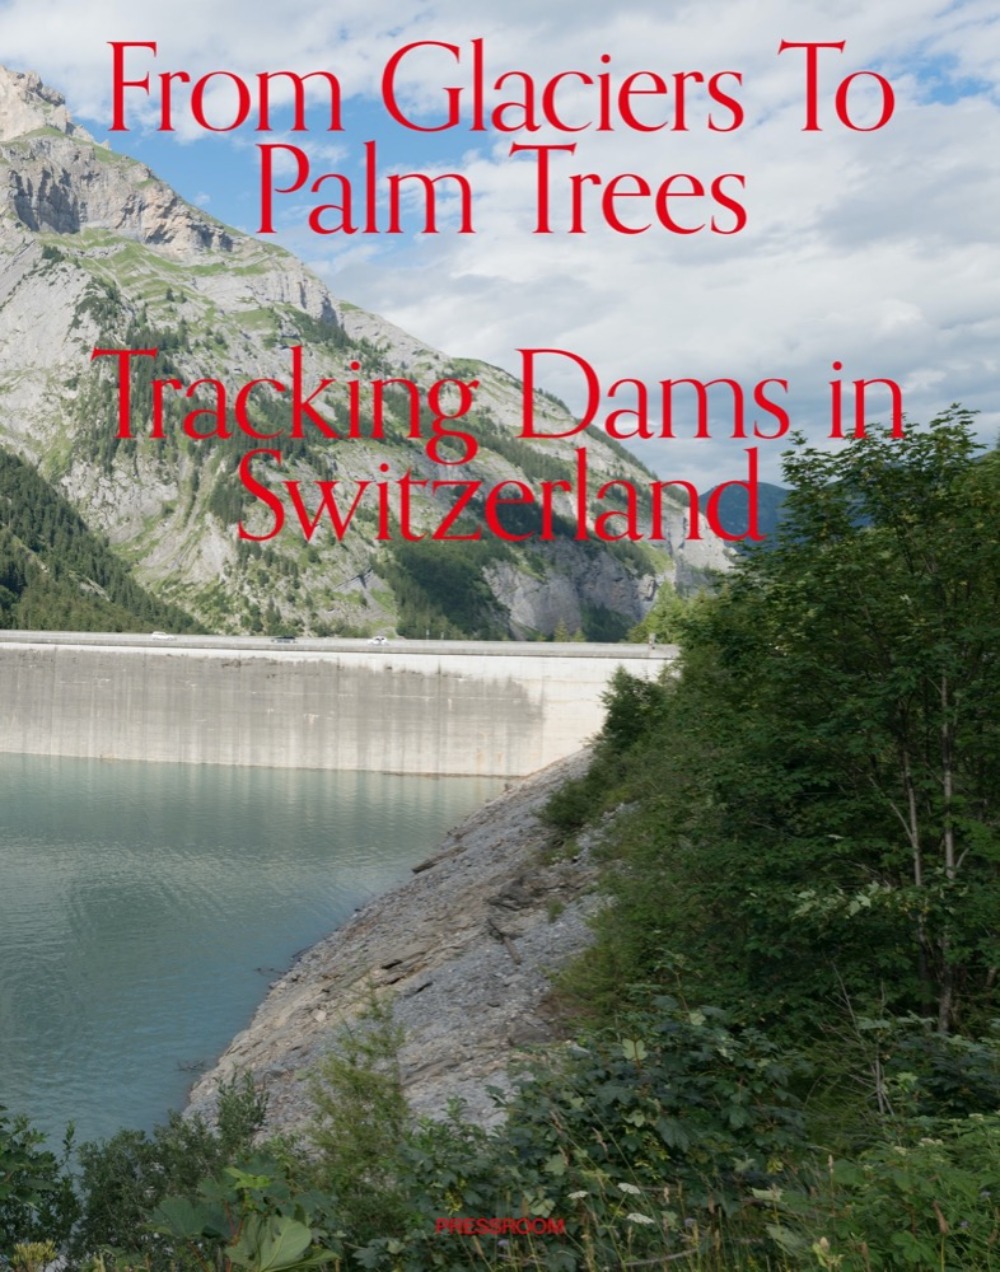 From Glaciers To Palm Trees: Tracking Dams in Switzerland · 김경태